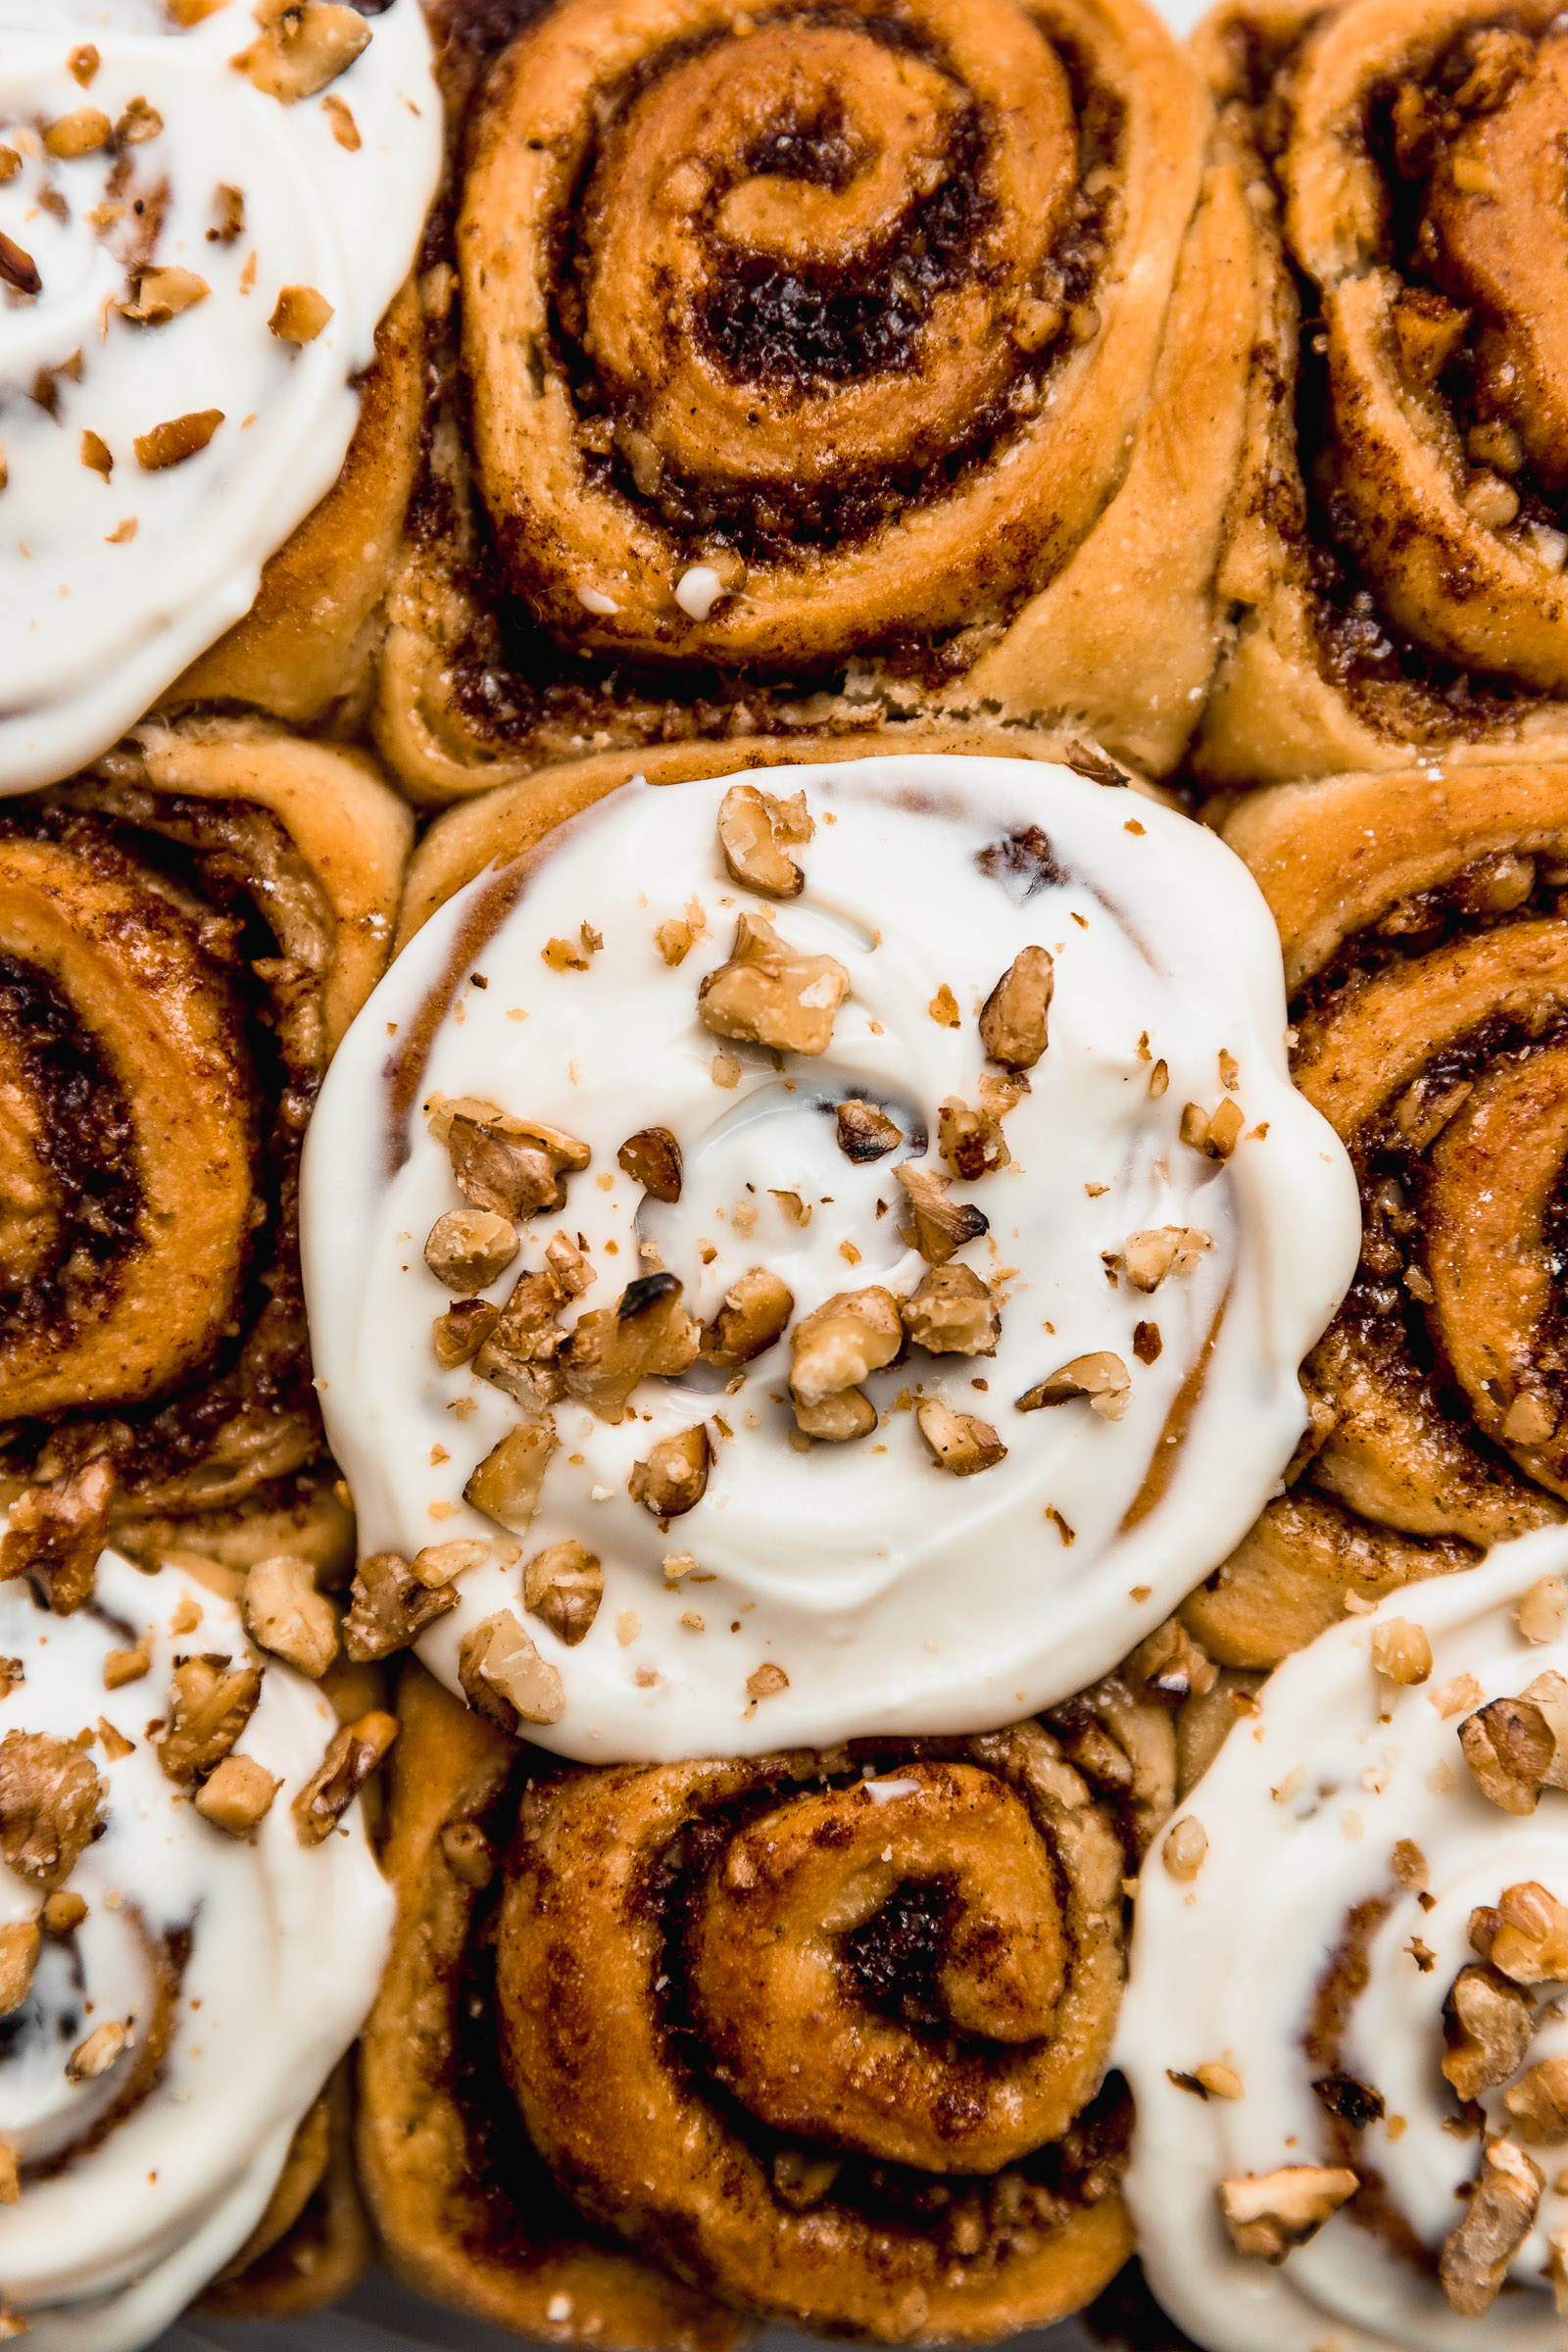 Closeup of banana cinnamon rolls. At the centre is one topped with cream cheese frosting and sprinkled with chopped walnuts. The ones on the side don't have frosting so you can see their shape and filling.